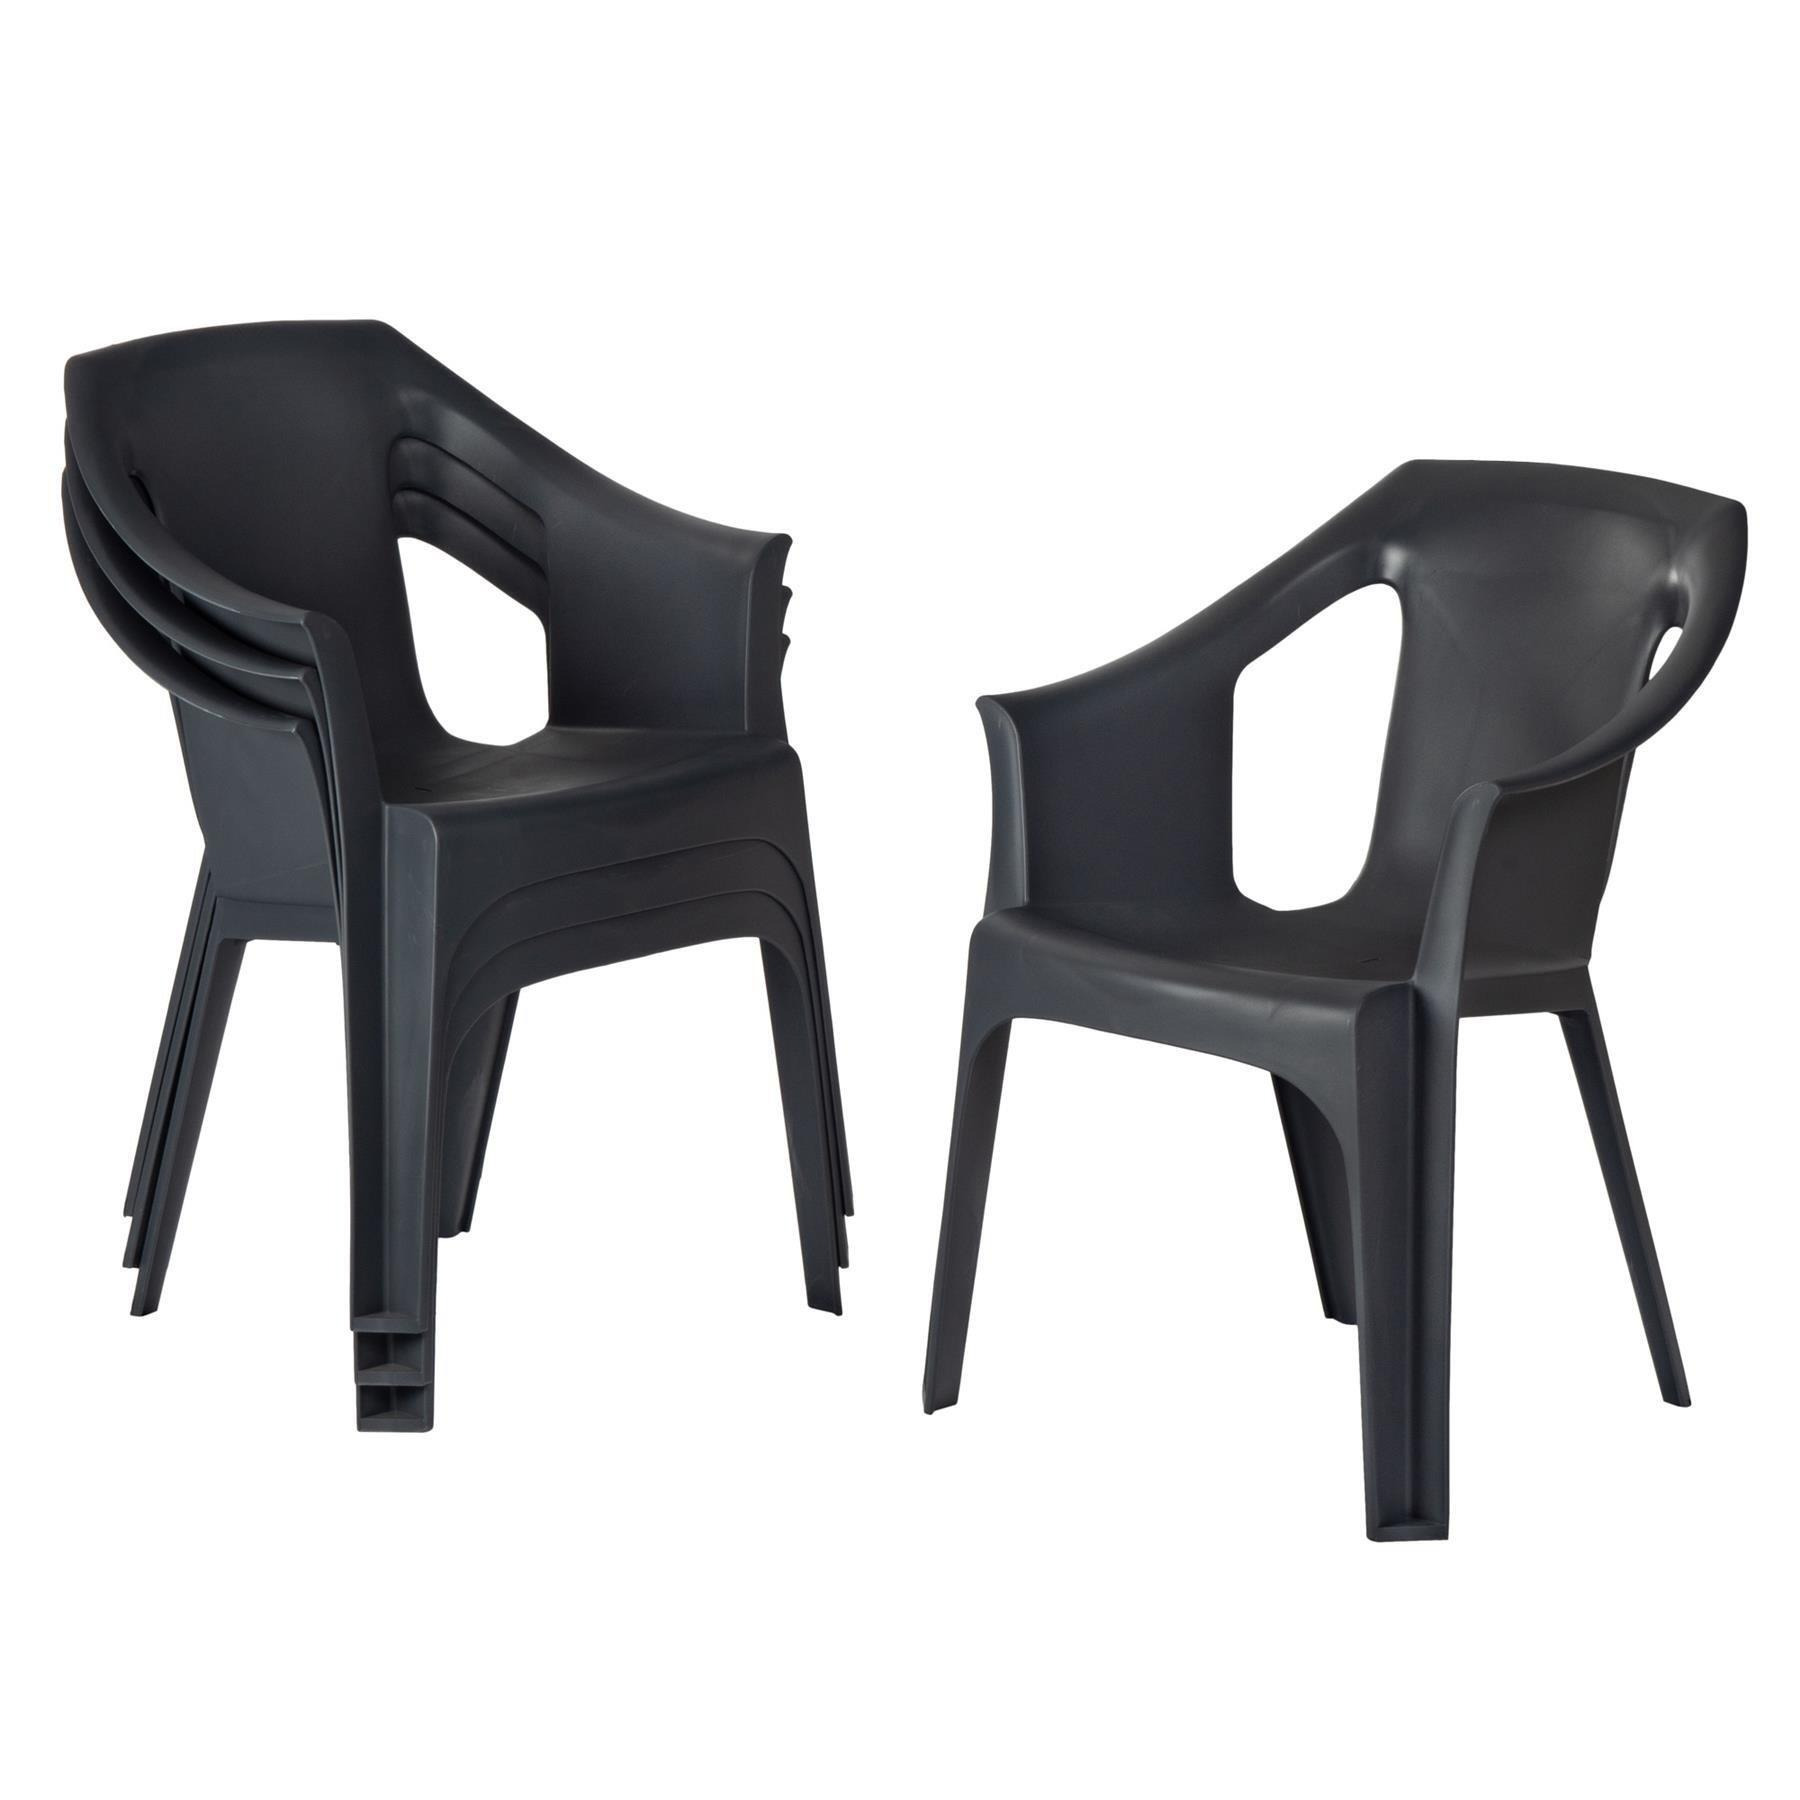 Cool Garden Dining Chairs Pack of 4 - image 1